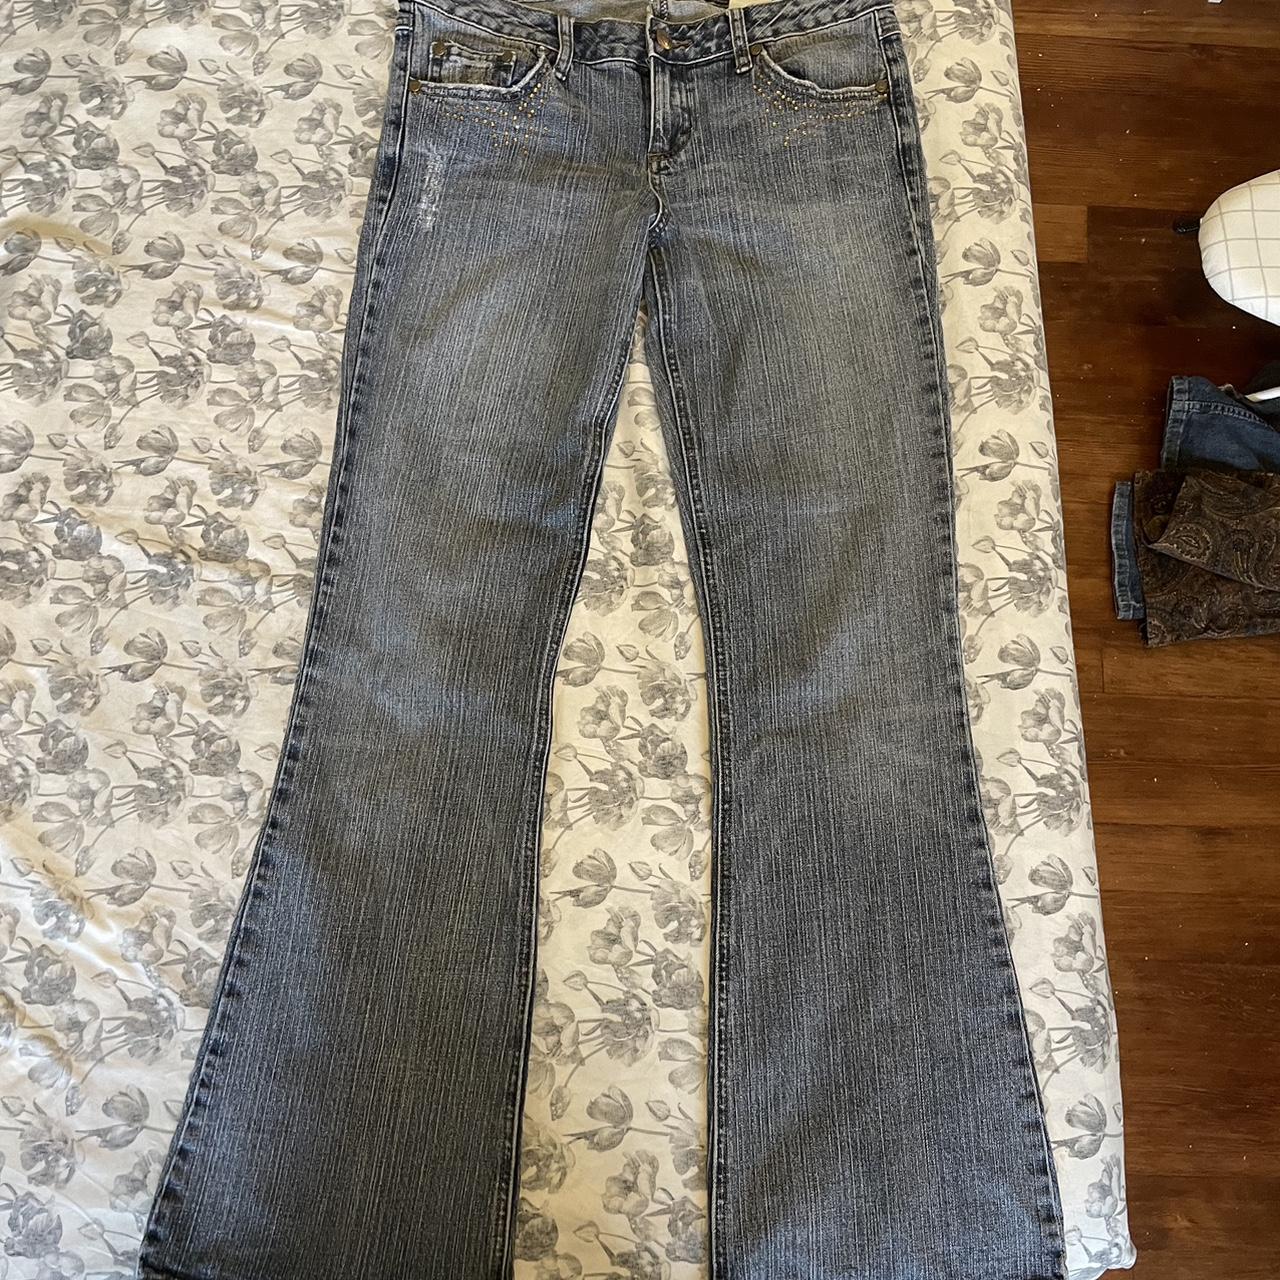 Mudd low rise flare jeans the wash on these are so... - Depop